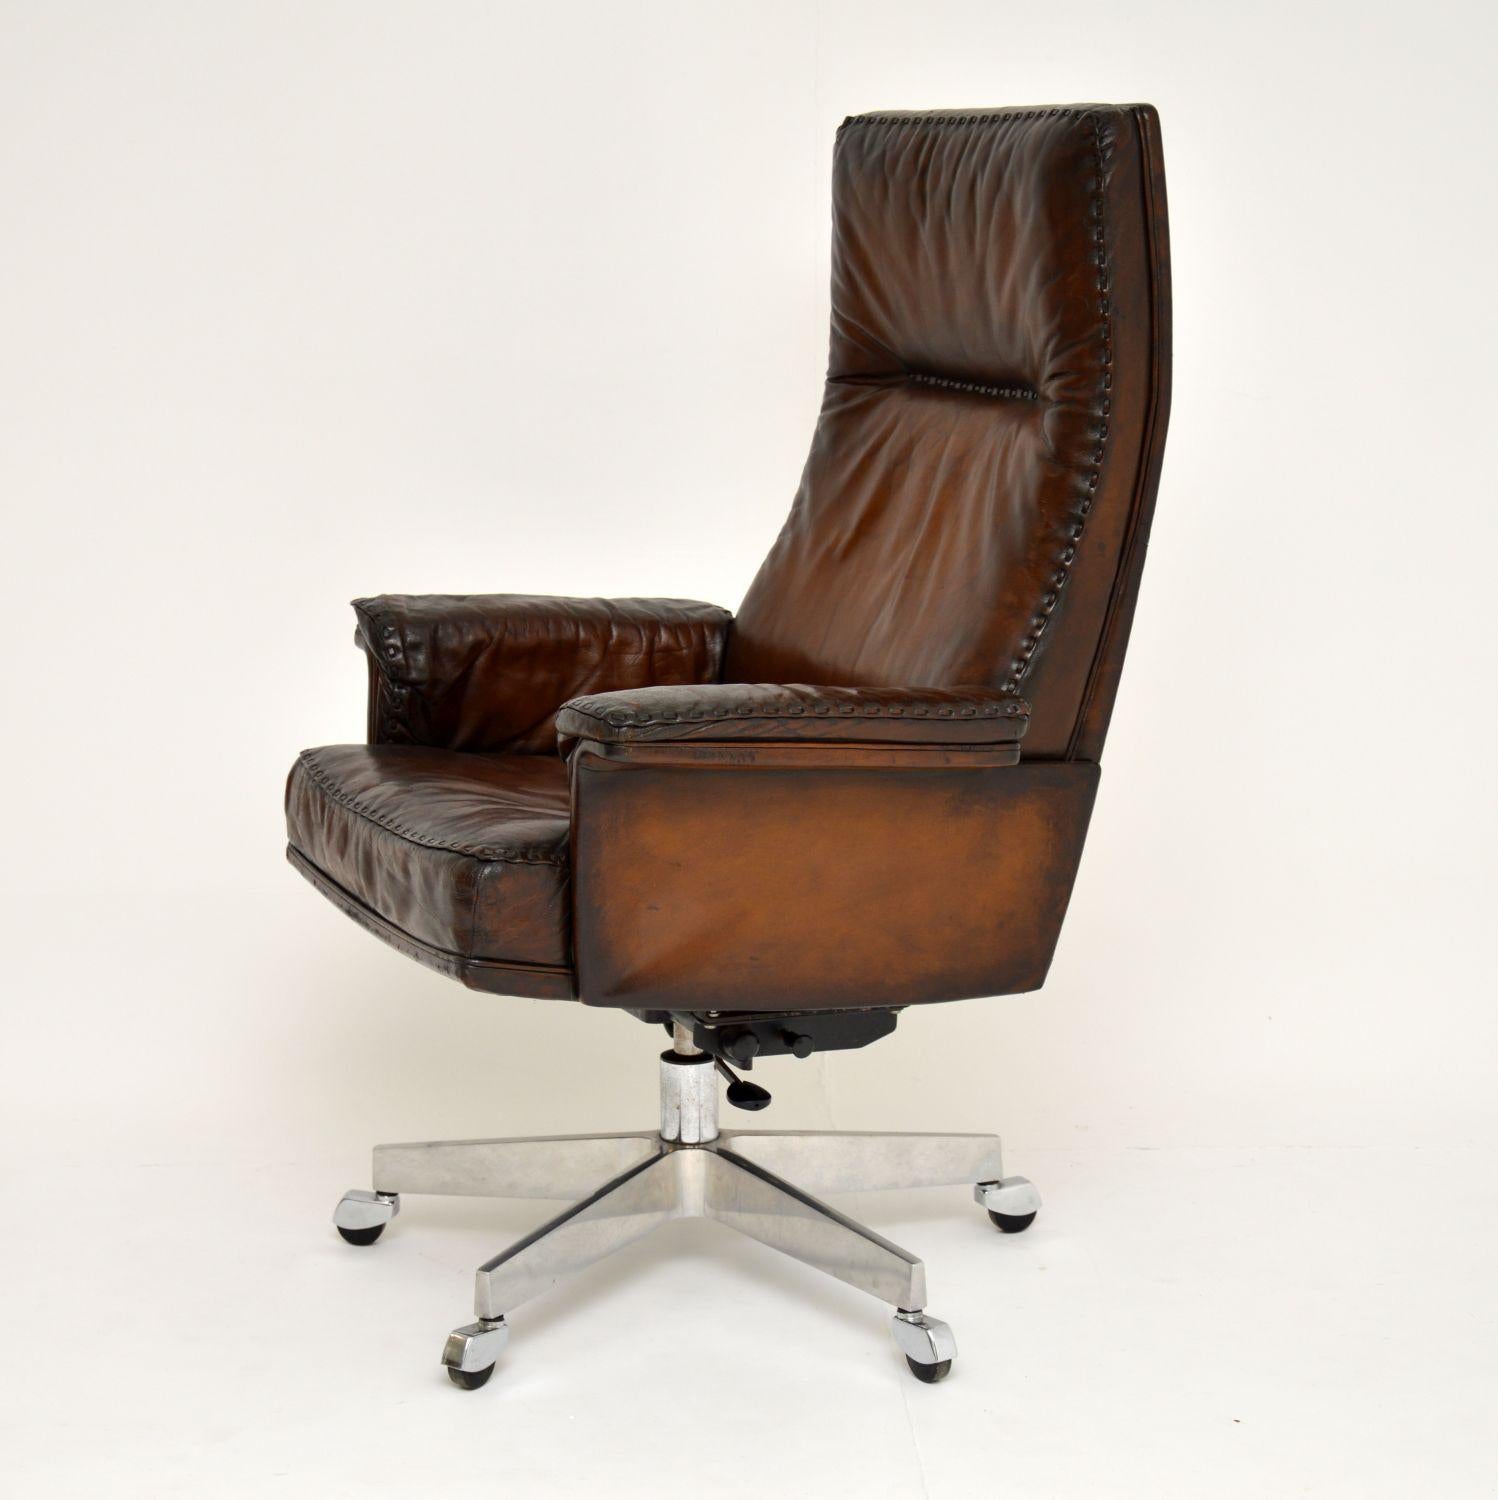 A superb vintage leather desk chair, made in Switzerland by De Sede in the 1960s-1970s. It’s of amazing quality and is unbelievably comfortable! This is so comfortable it could easily be used as a lounge chair as well as a desk chair. The leather